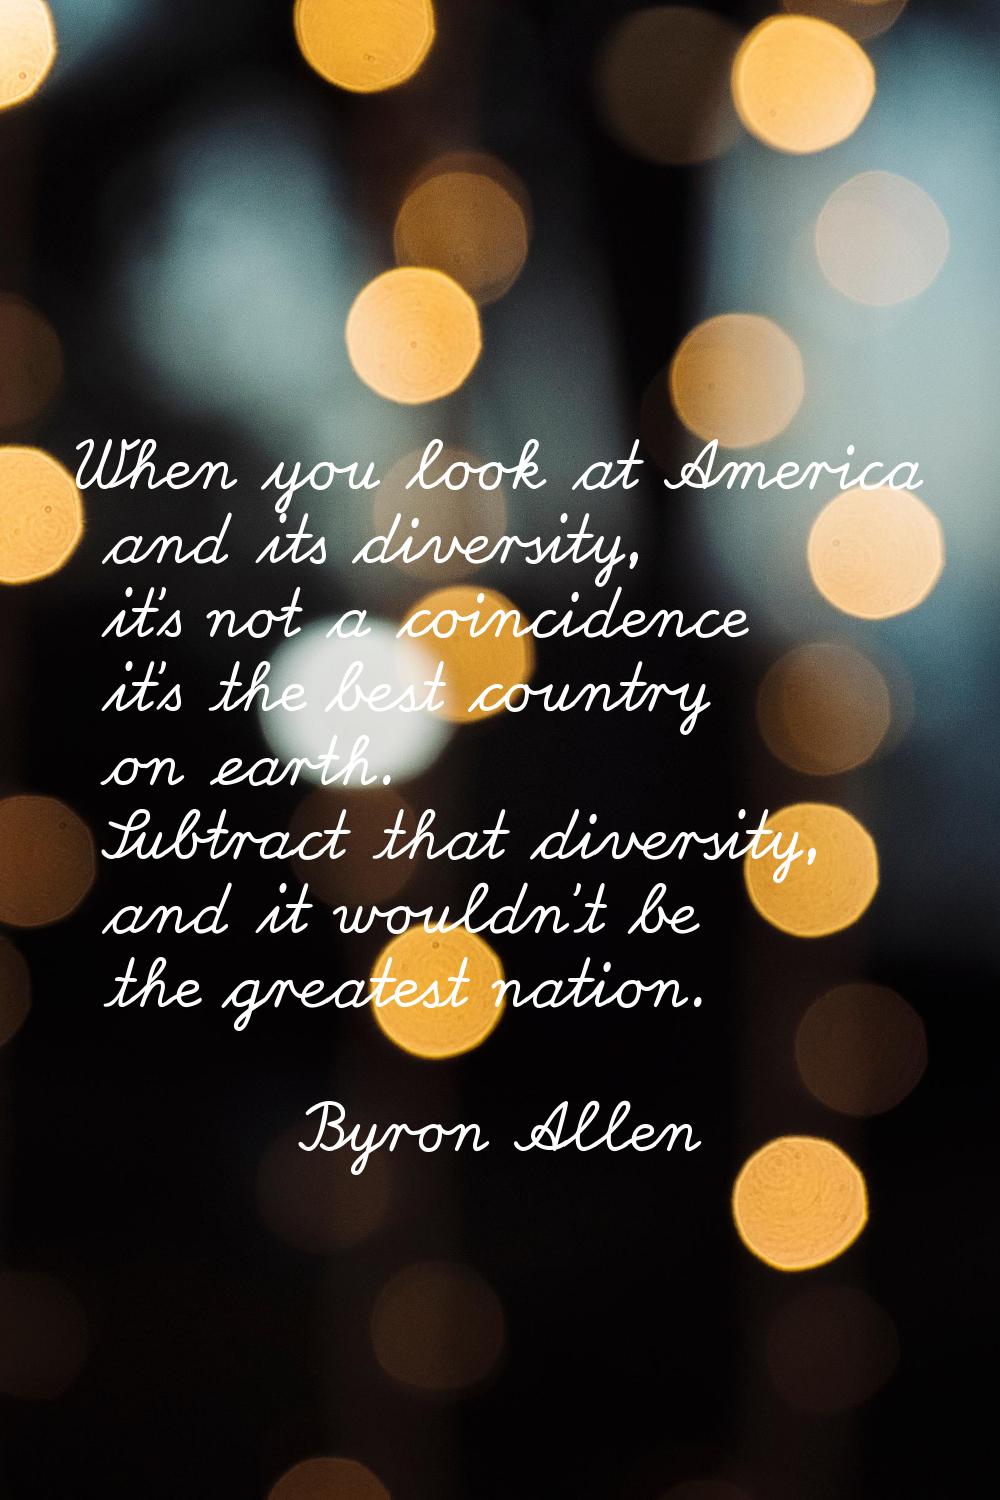 When you look at America and its diversity, it's not a coincidence it's the best country on earth. 